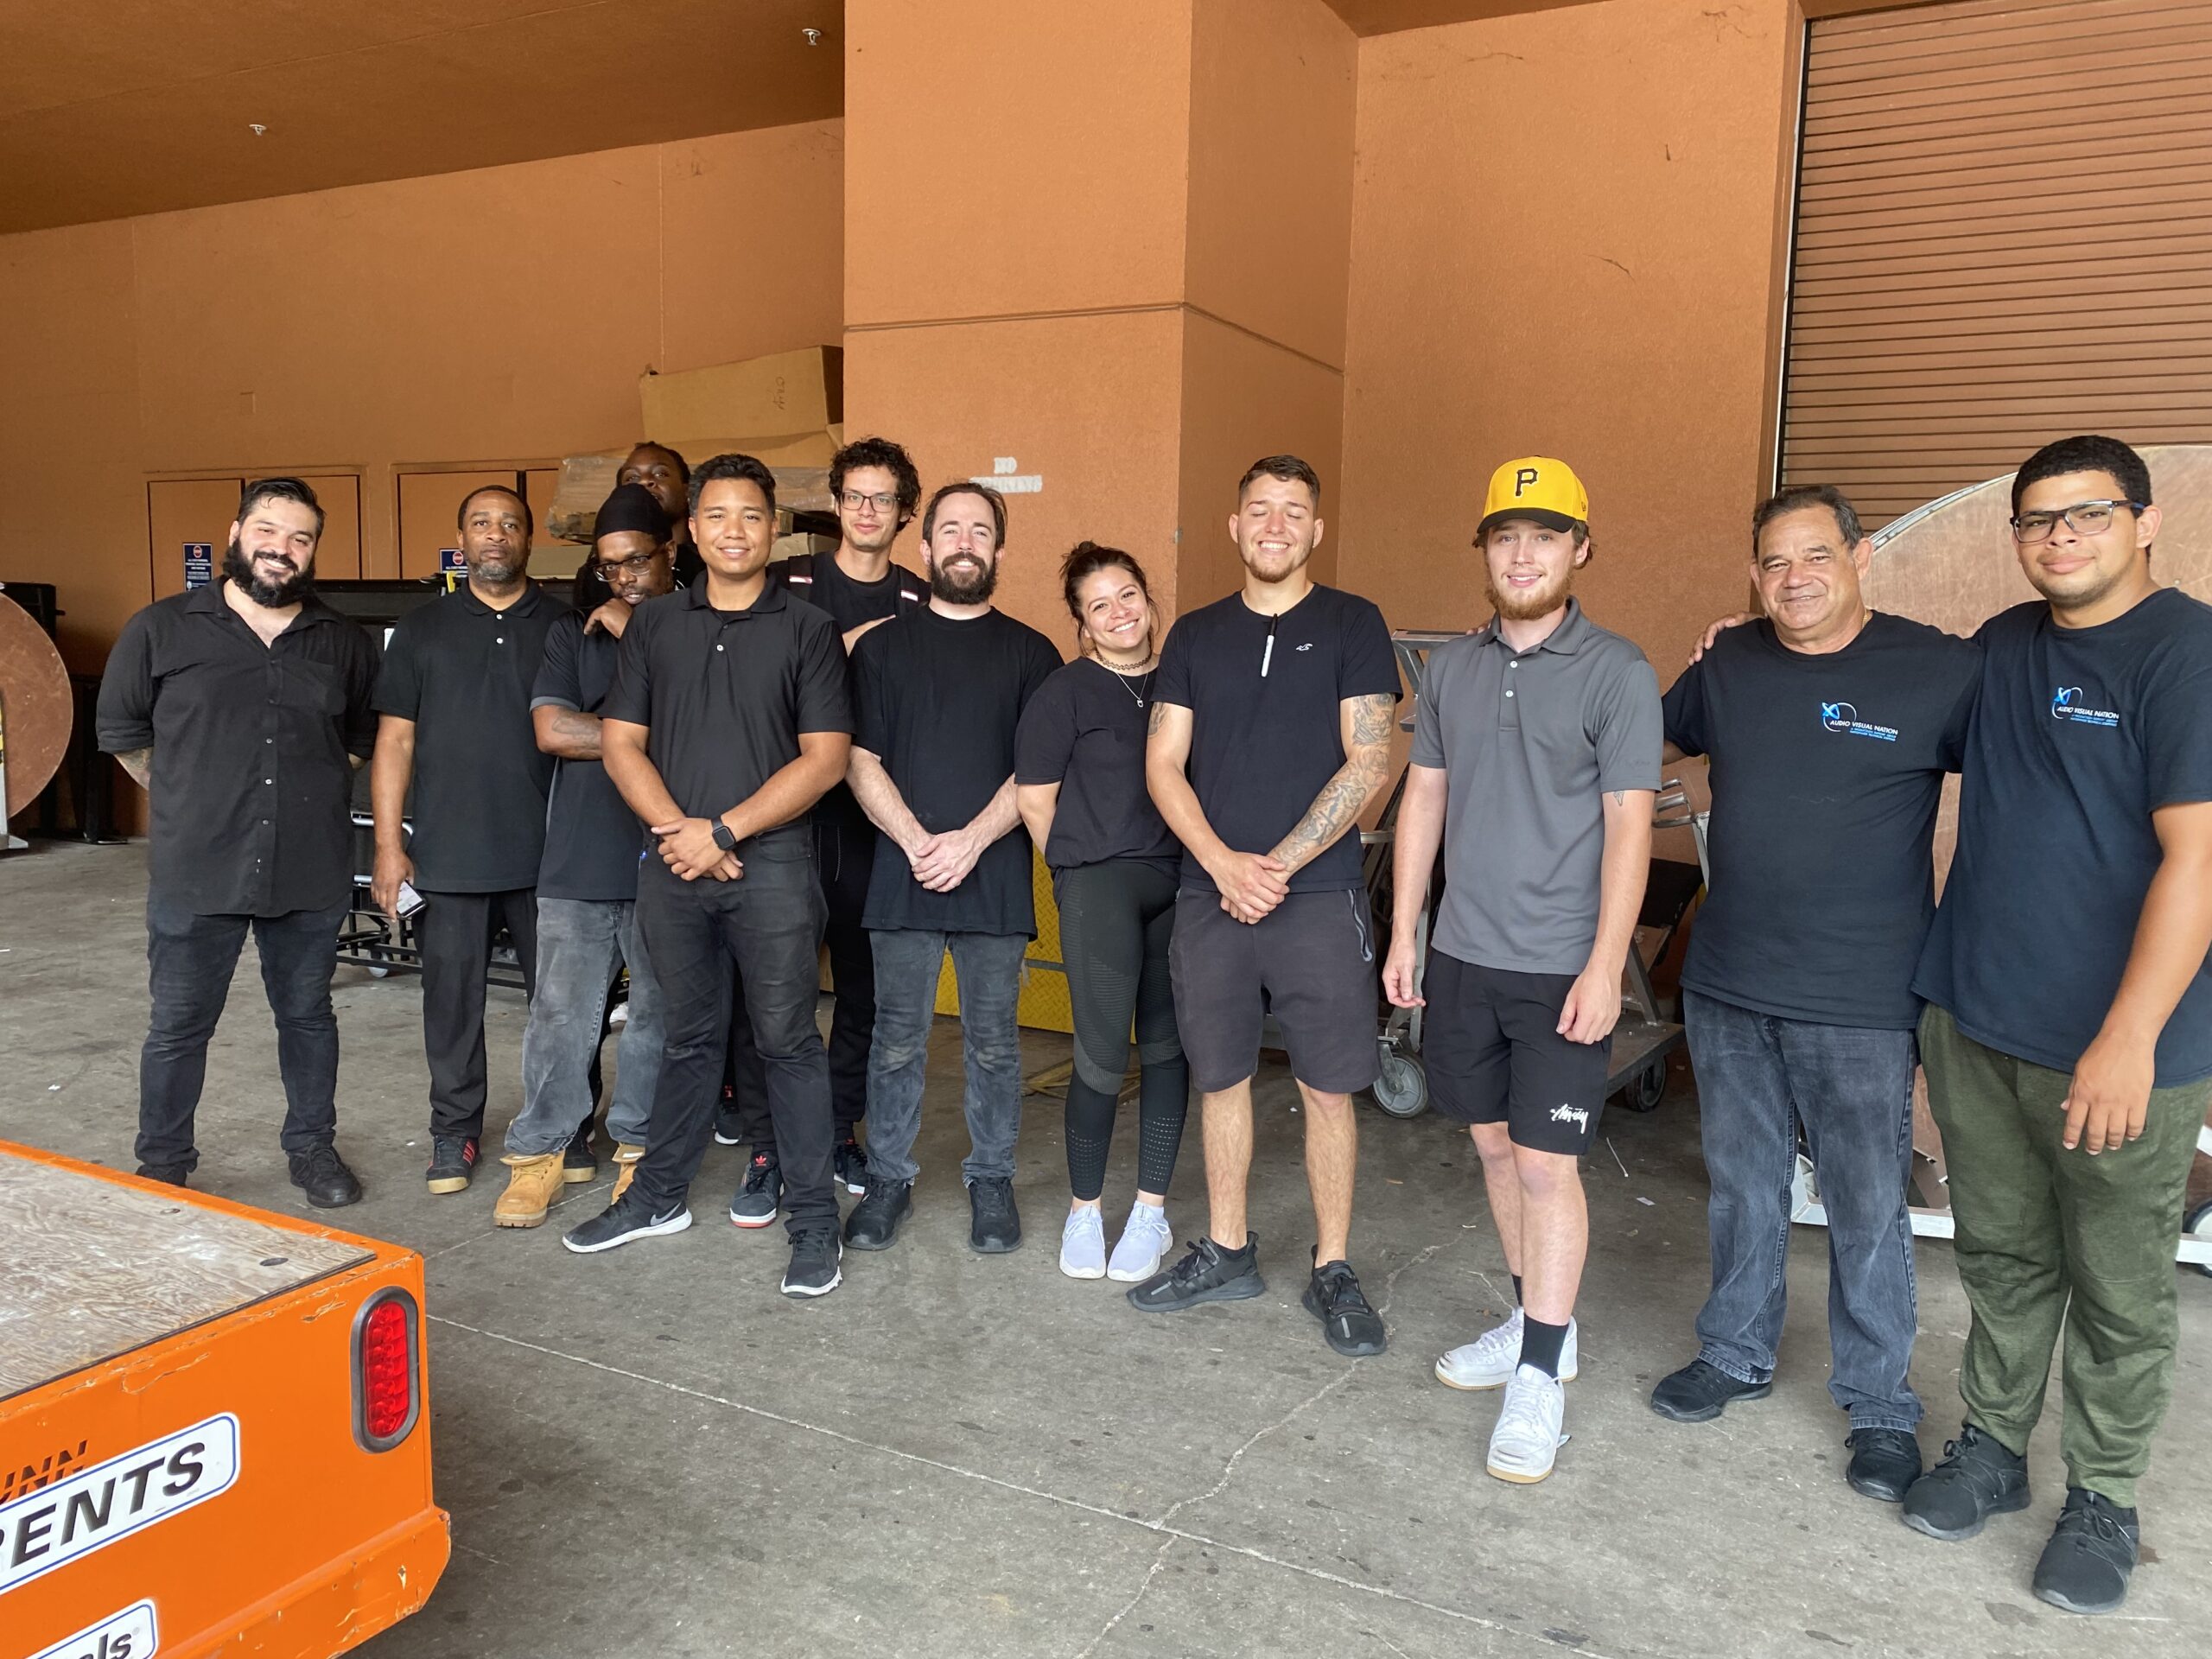 A group photo of Audio Visual Nation crew members, all dressed in black, smiling and standing together outside a loading dock.